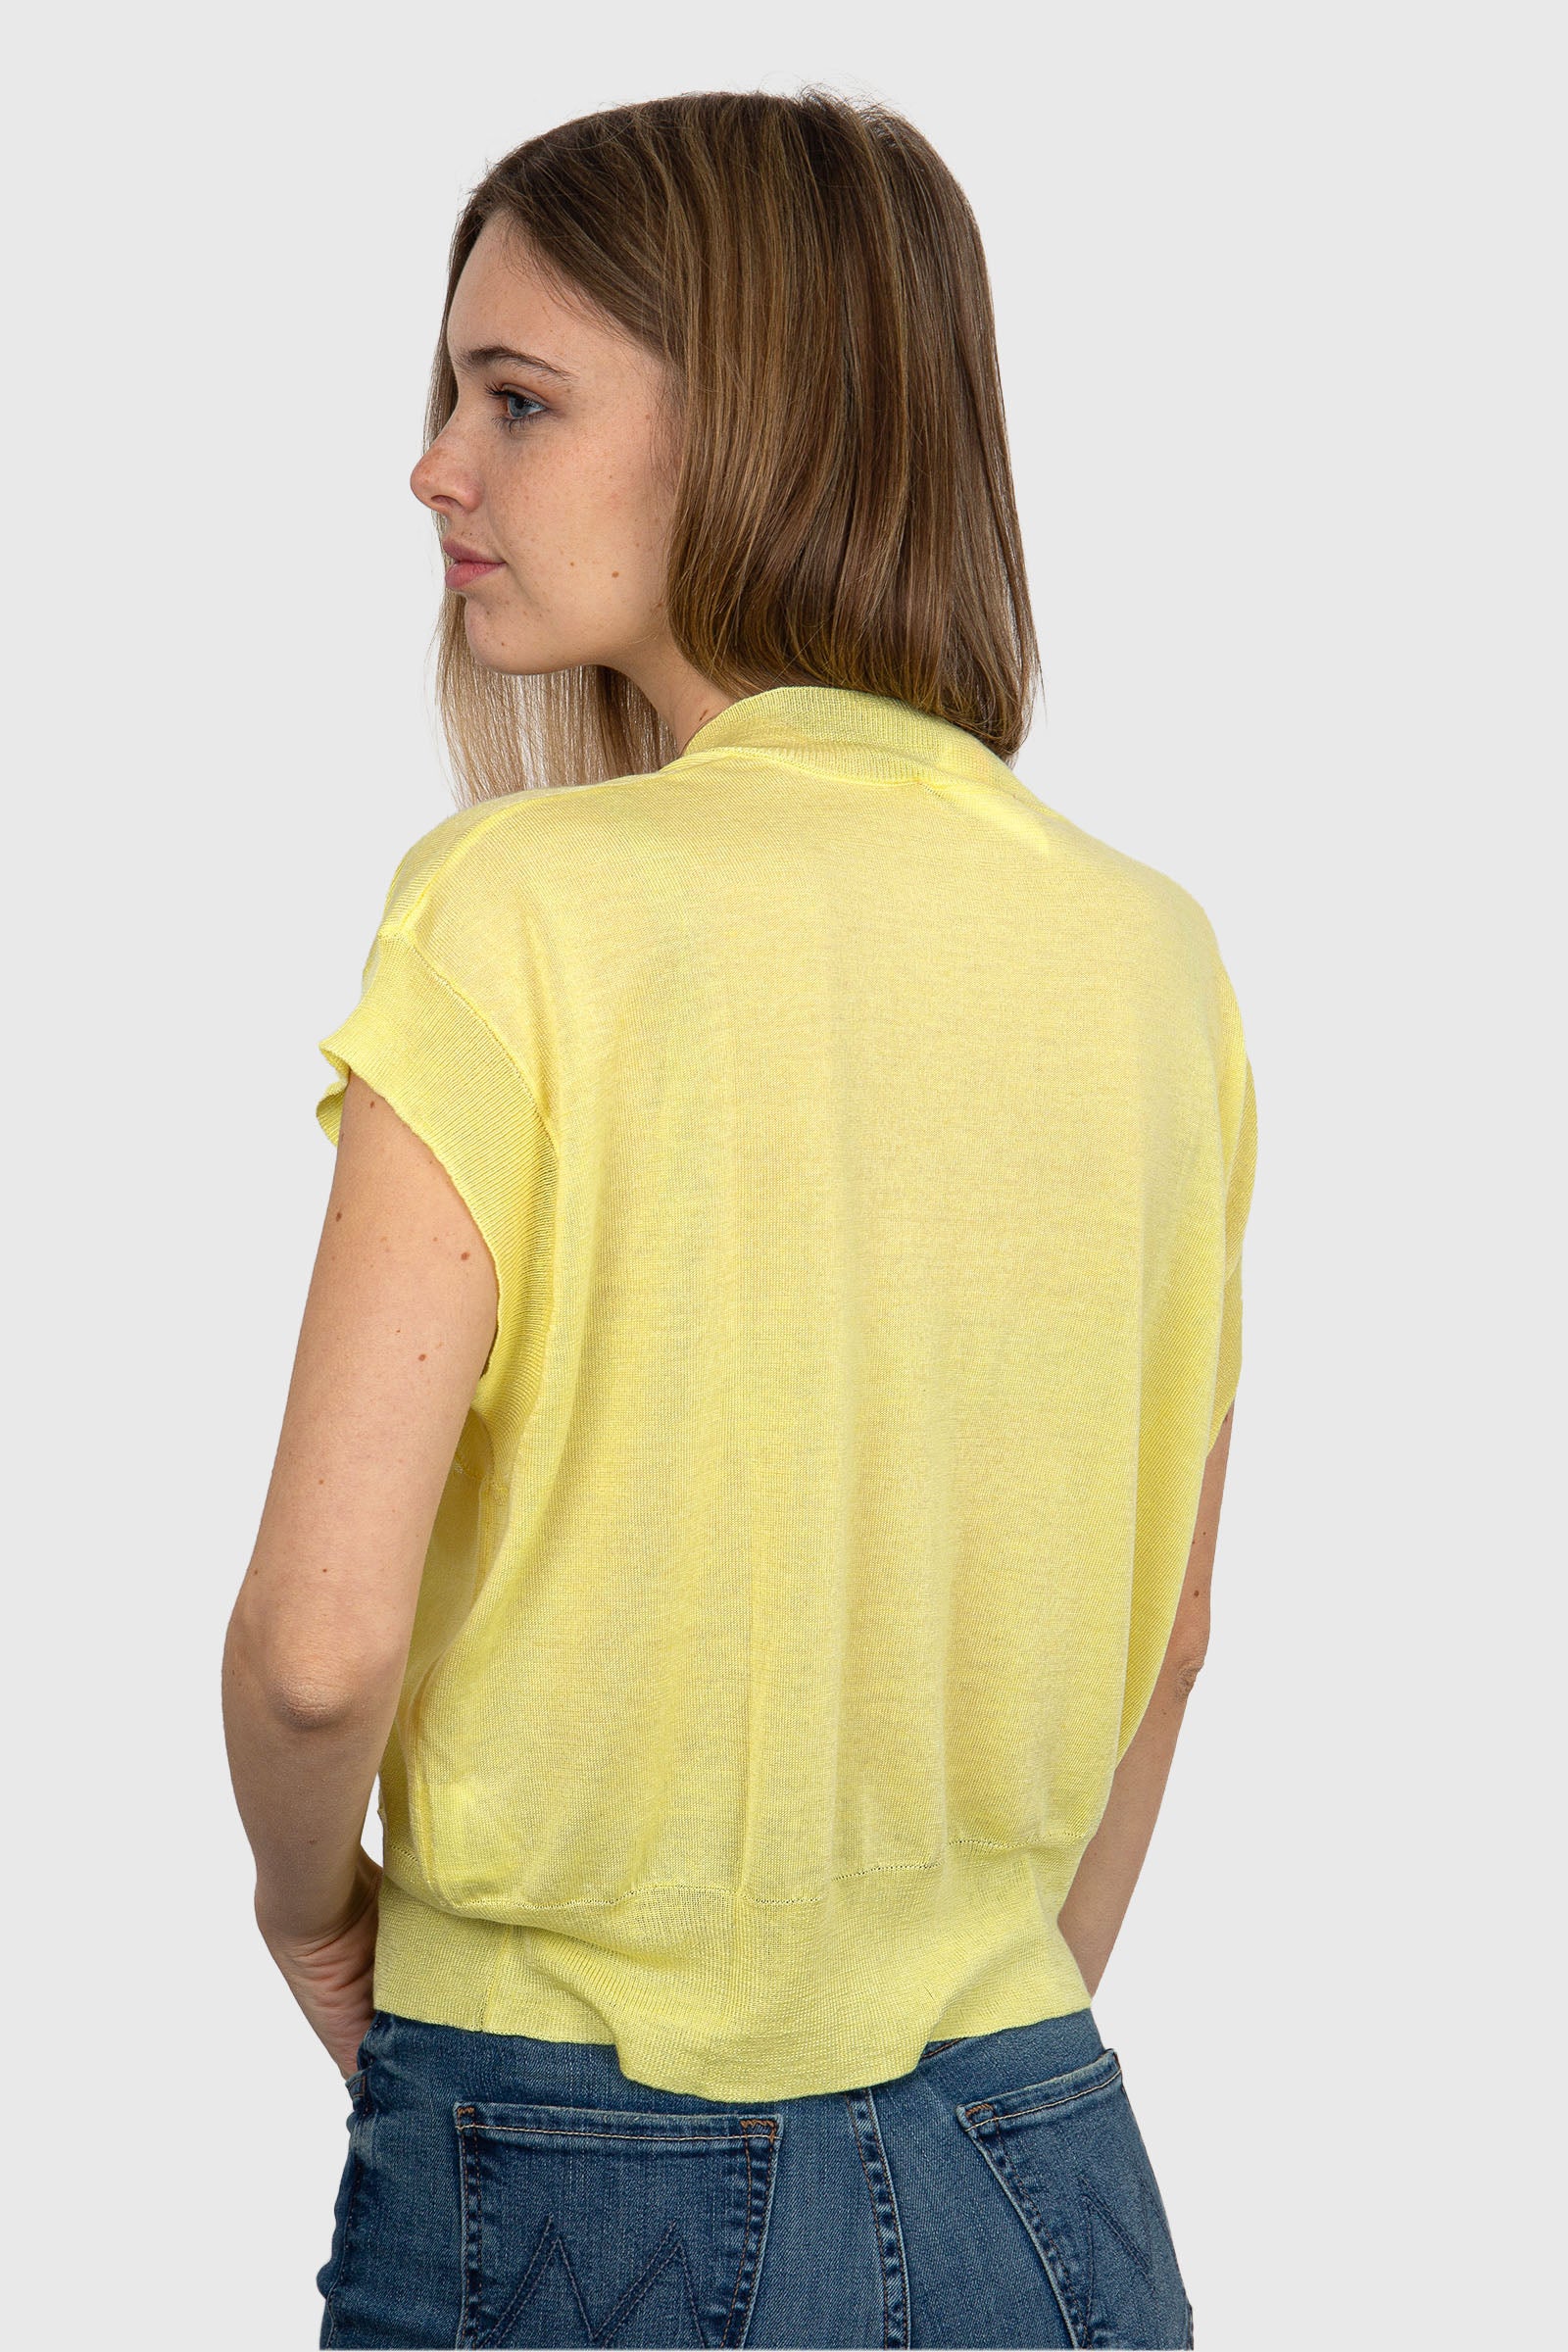 Absolut Cashmere Blair Synthetic Yellow Sweater - 4